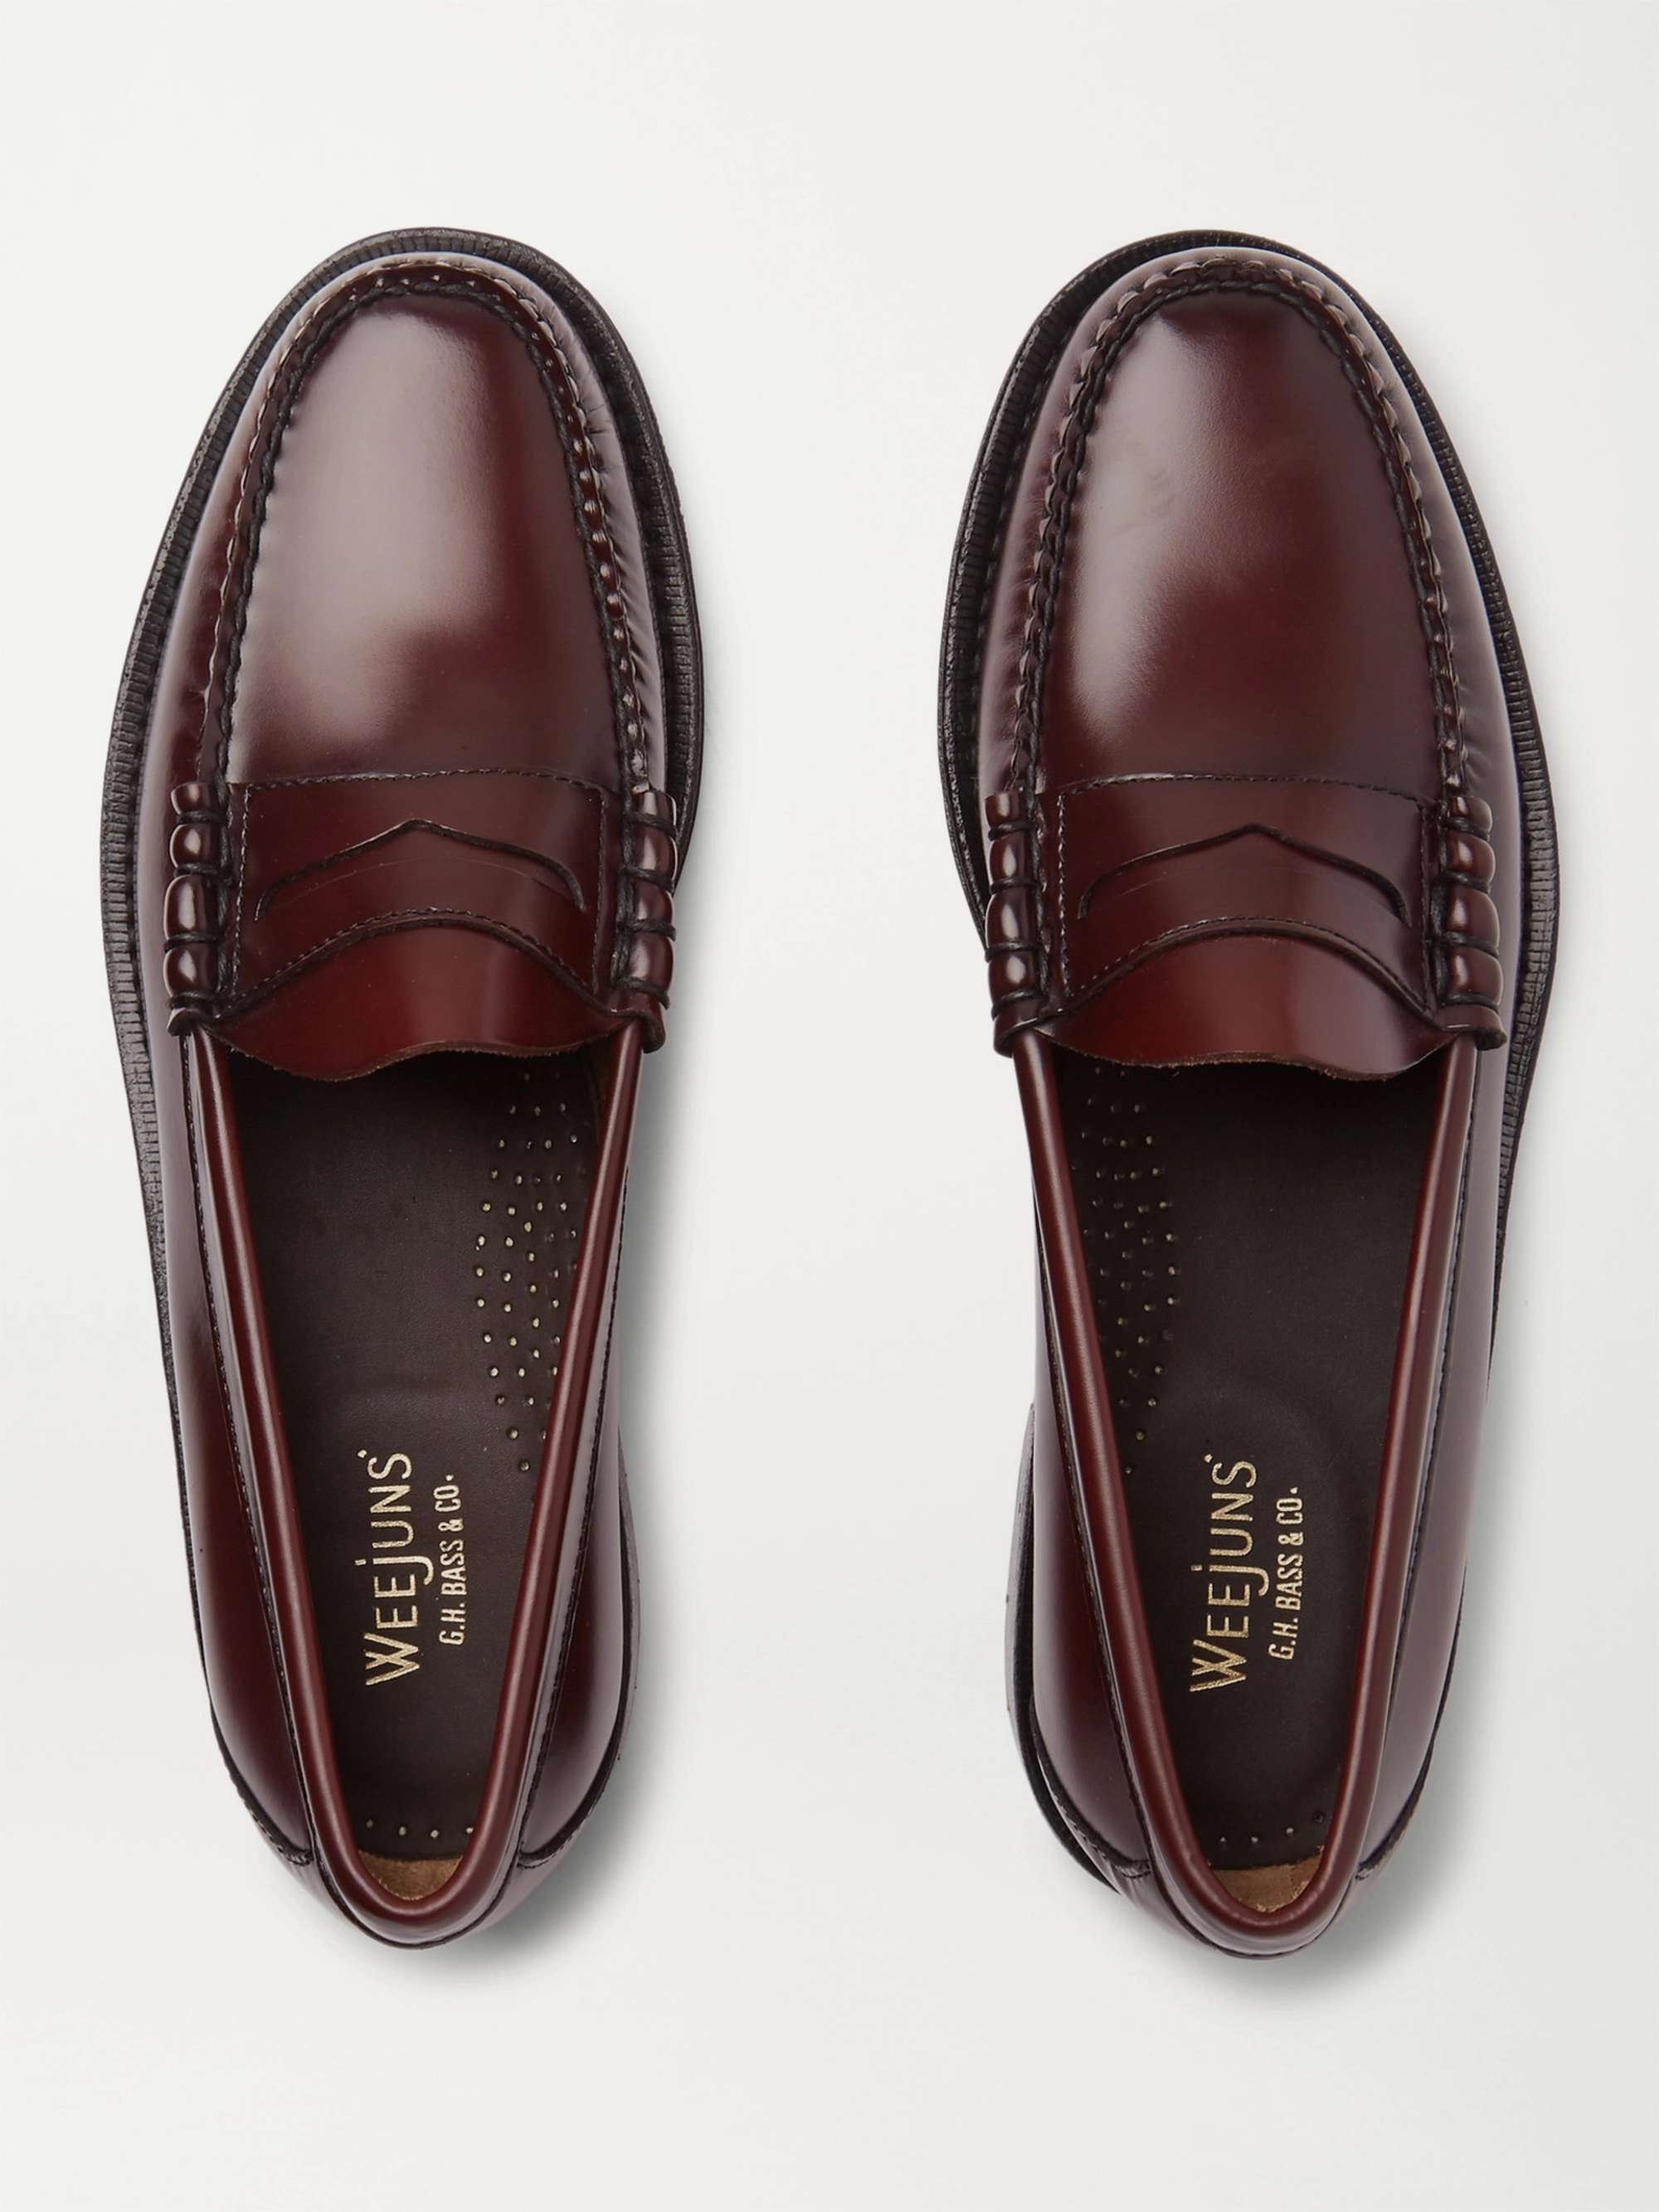 Ombord bit Due G.H. BASS & CO. Weejuns Heritage Larson Leather Penny Loafers | MR PORTER